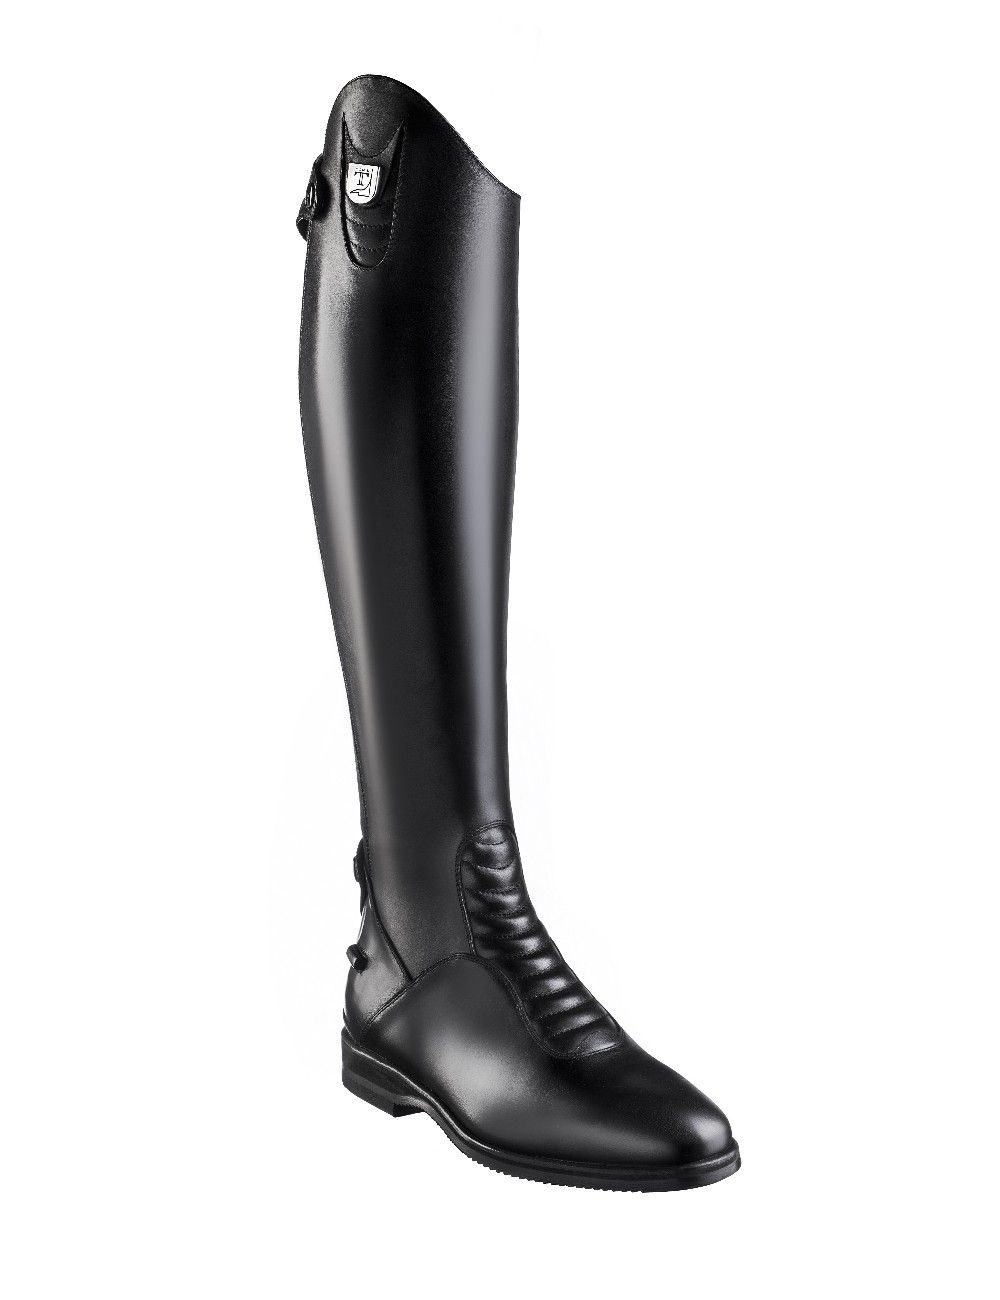 Tucci Harley long boots